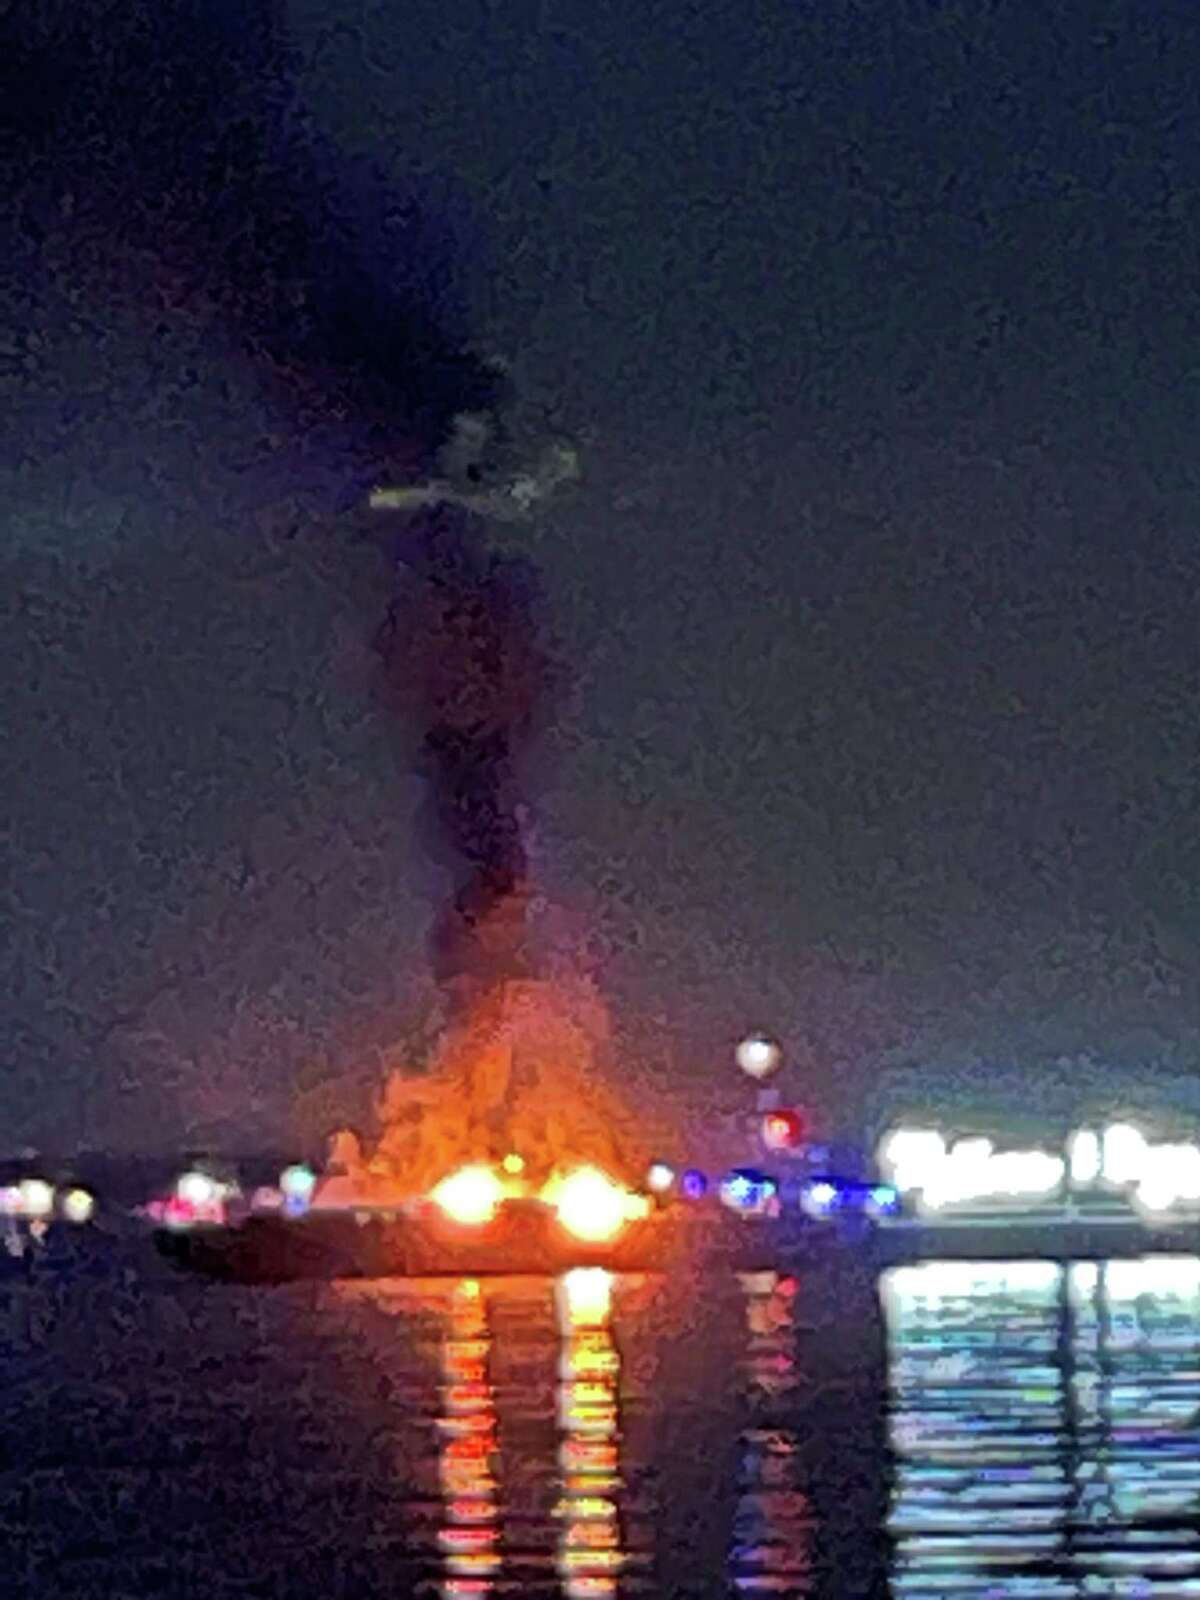 No one was hurt Thursday night when a barge burst into flames at the Westport Police Athletic League’s annual fireworks celebration, the fire chief said.